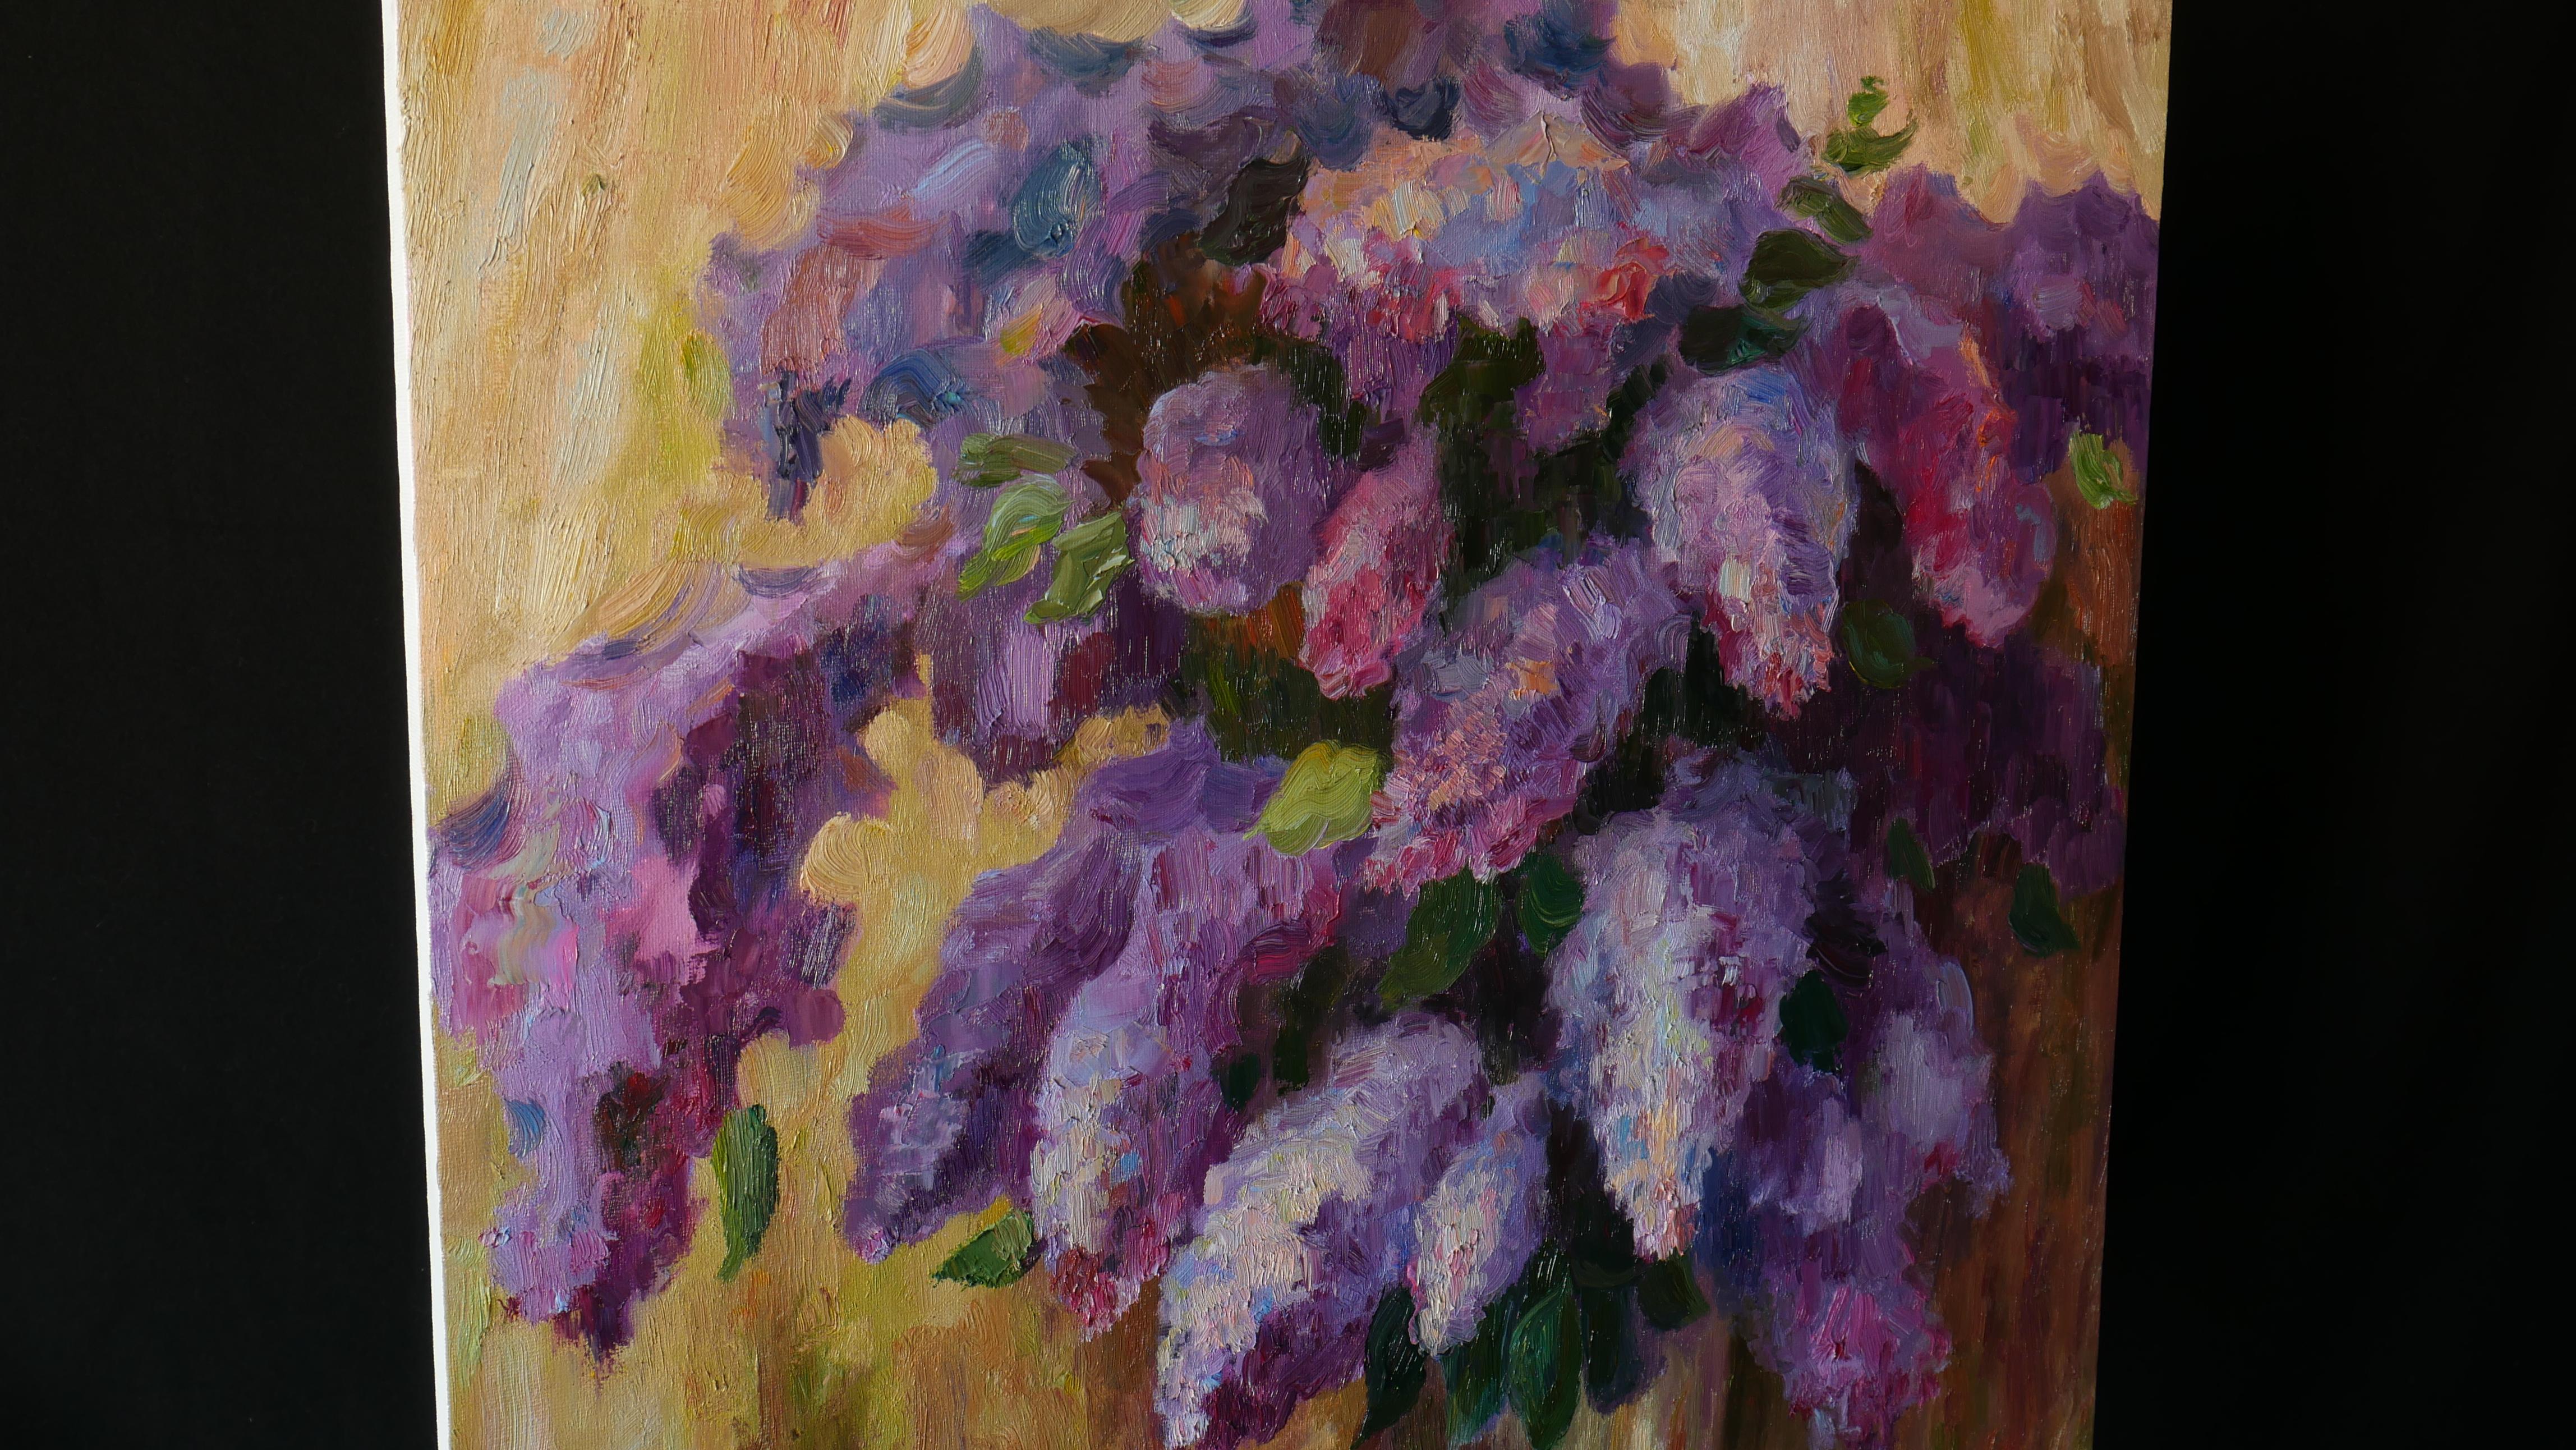 Lilacs In Vase - painting #2 - Abstract Painting by Nikolay Dmitriev